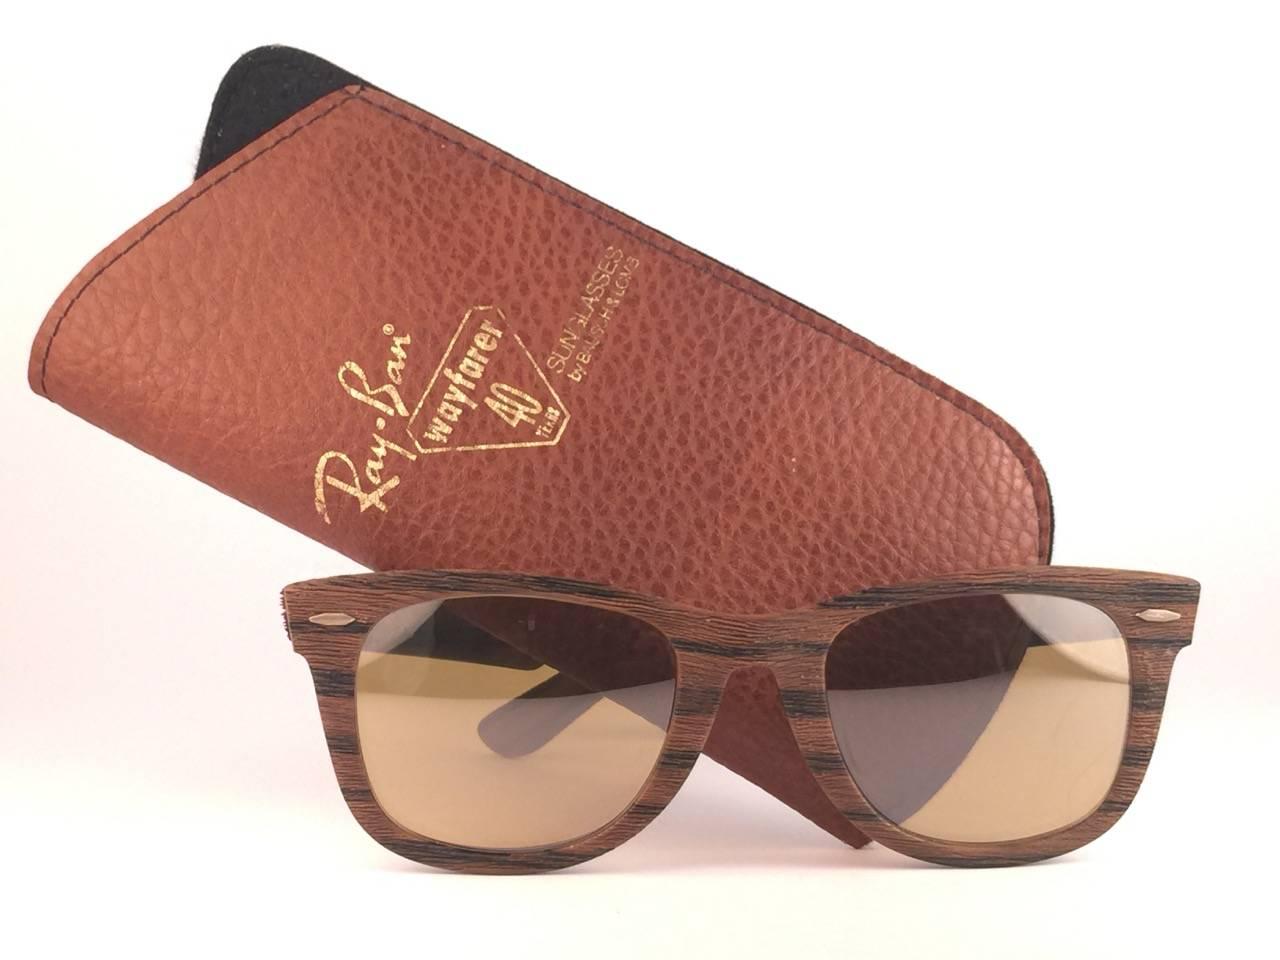 New and Rare collectors item the ultra rare edition of the classic Wayfarer: The Woodies. 
These were made in 3 colors, from light brown to dark brown. These are the dark Tiki edition. Sporting RB50 The General lenses. 5022, the classic size. 
Frame